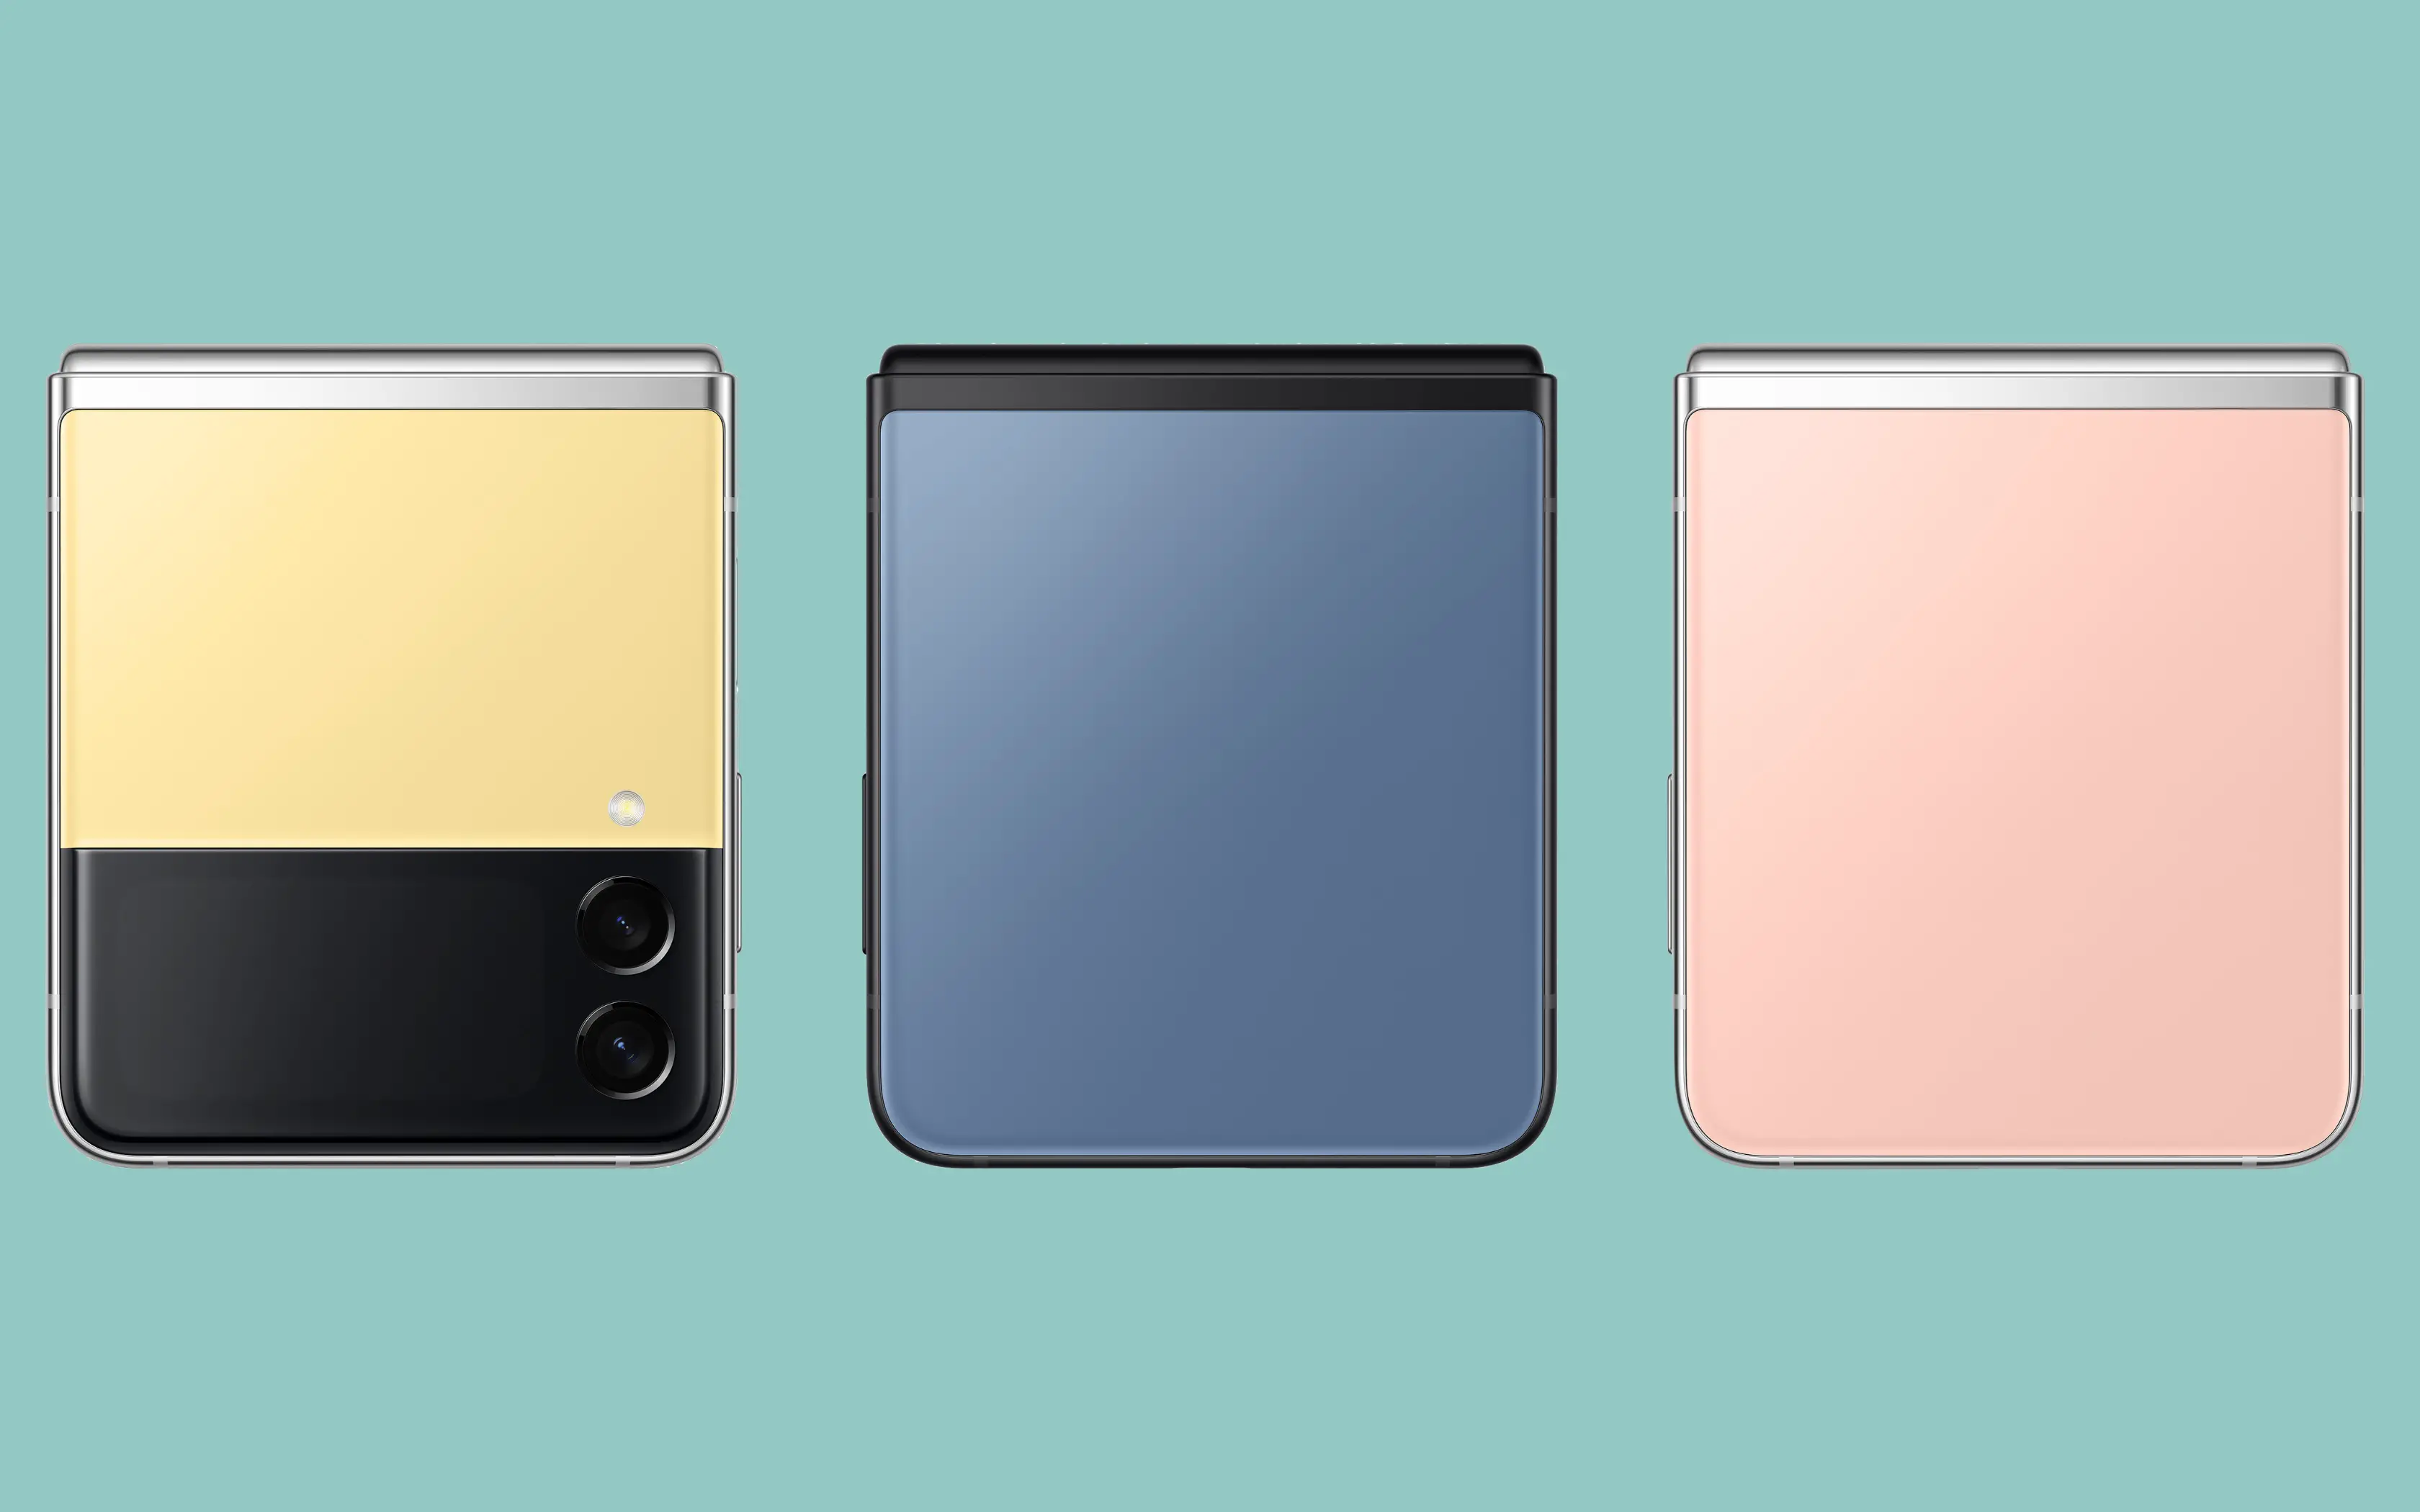 Samsung Galaxy Z Flip 4 will be accessible in 71 color varieties